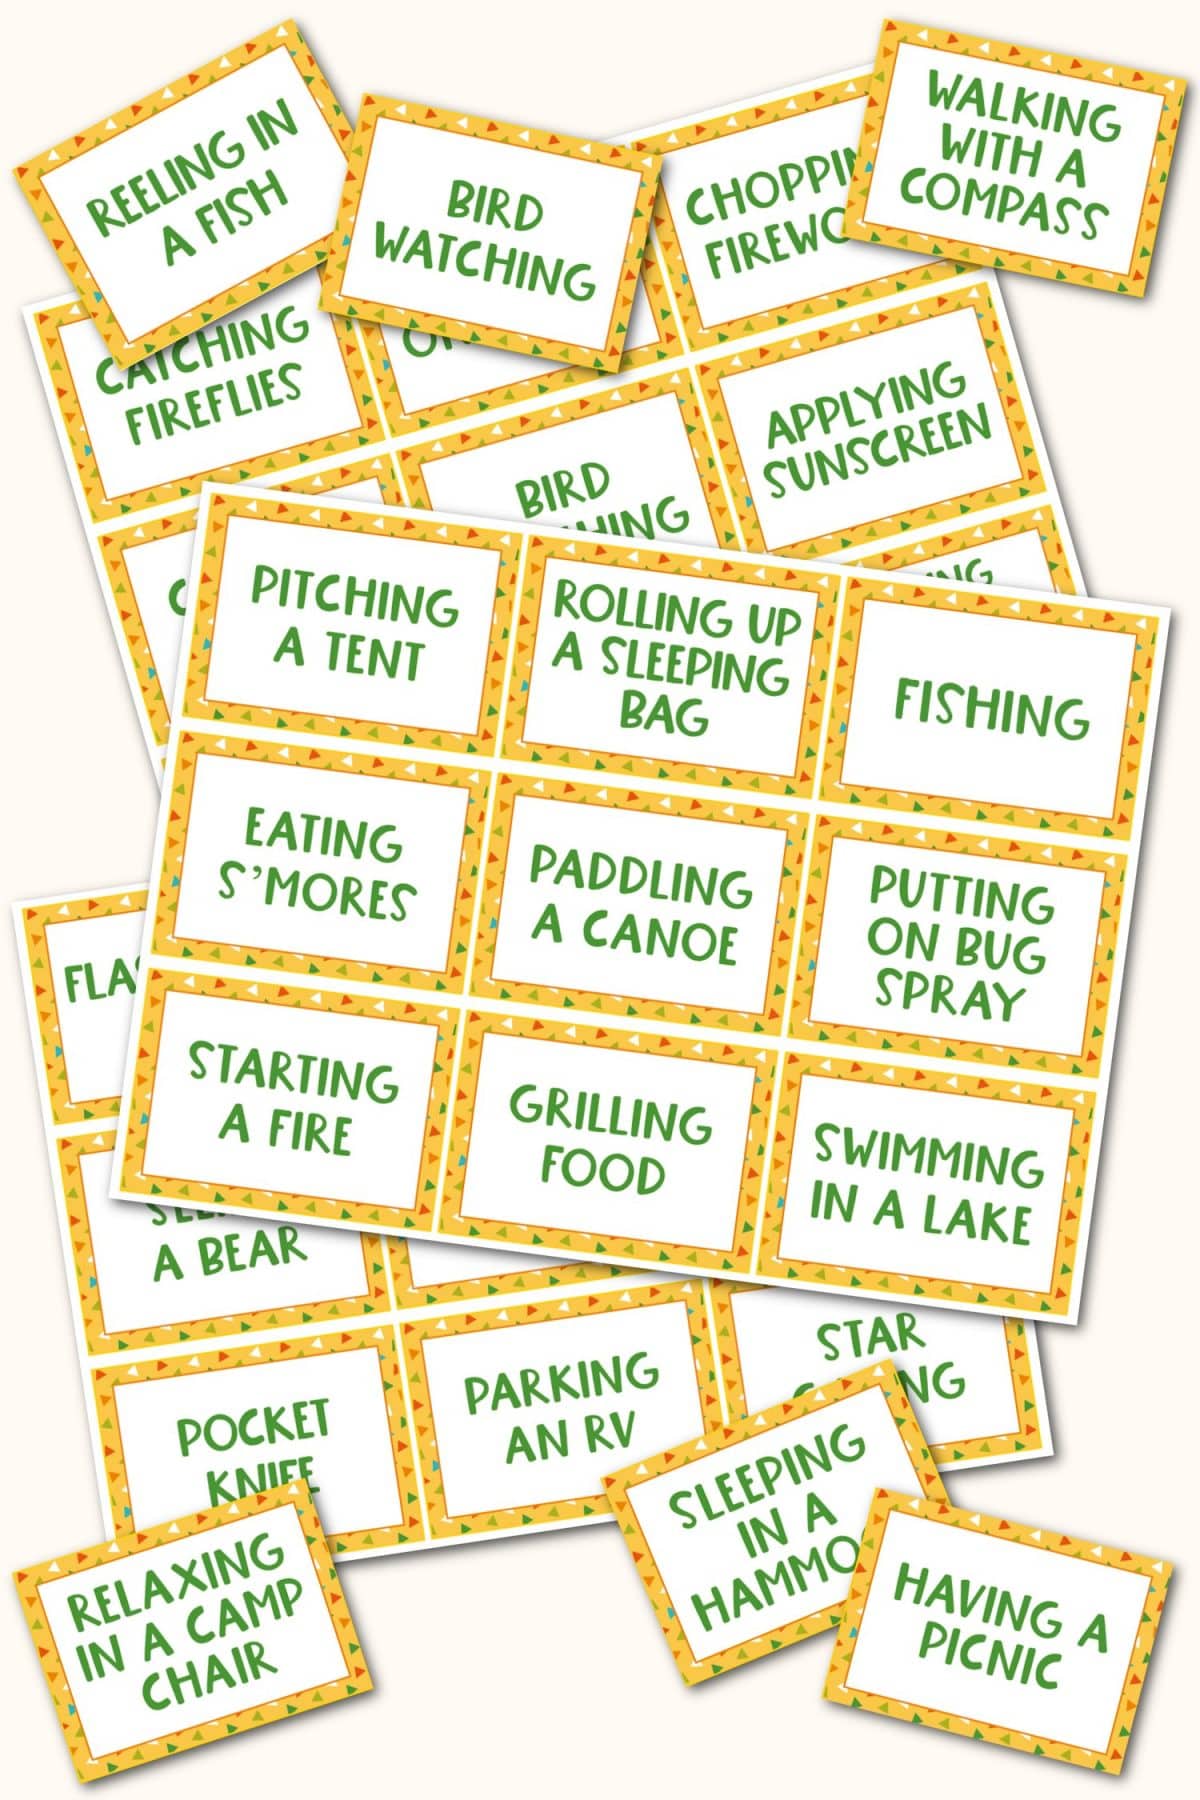 Camping game cards for Pictionary, catchphrase and more!